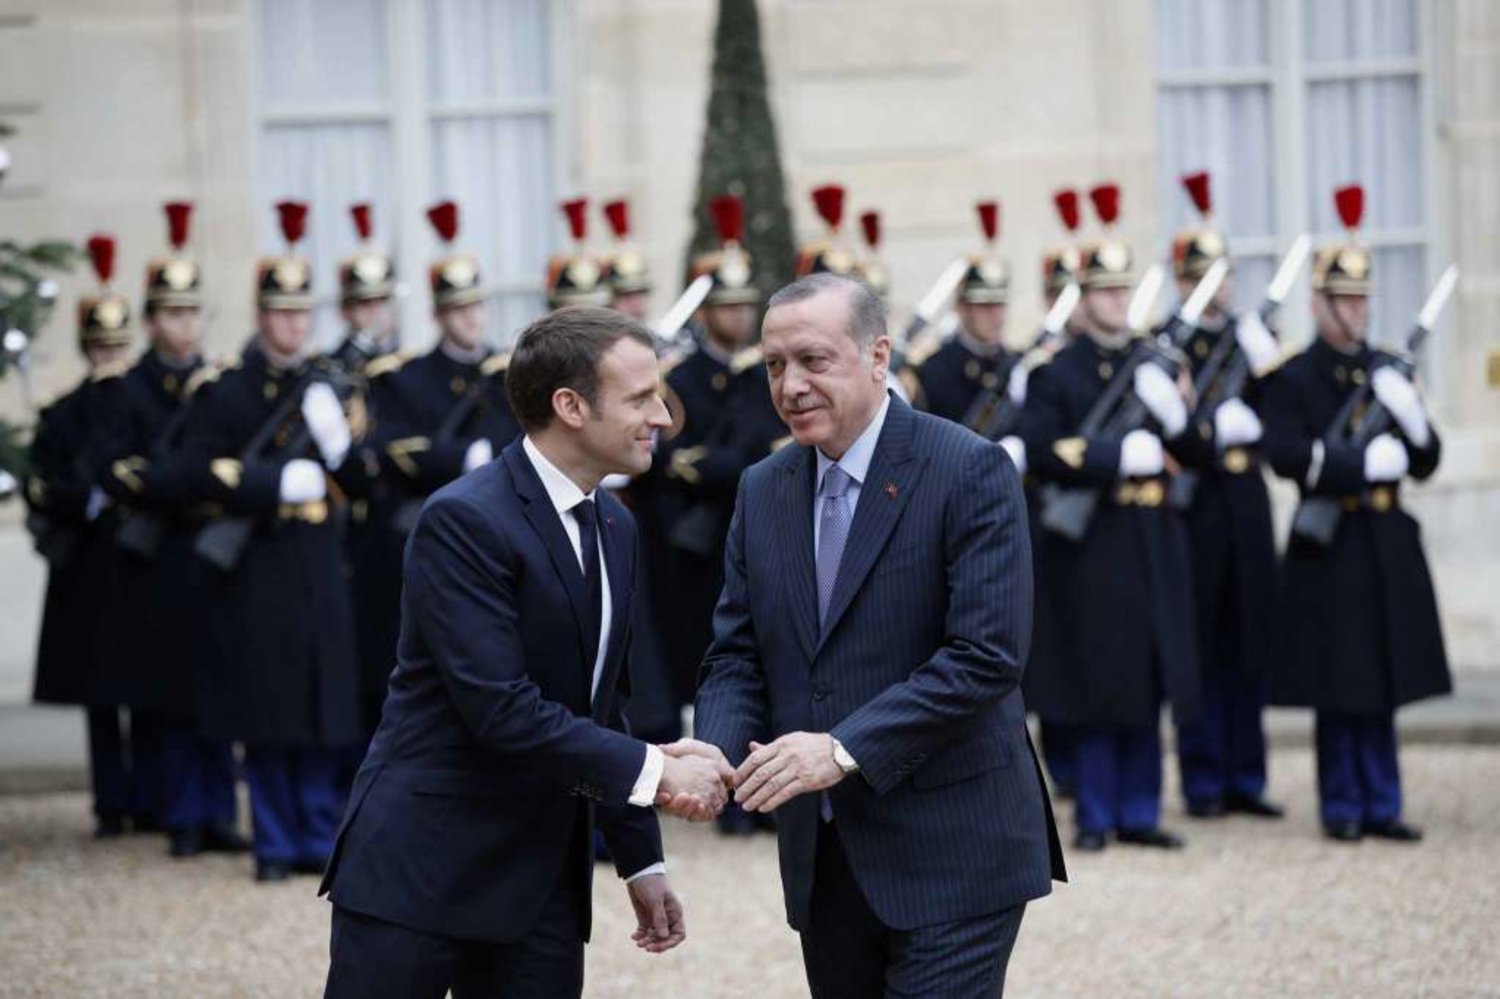 Turkish President Recep Tayyip Erdogan, right, is welcomed by French President Emmanuel Macron, at the Elysee Palace in Paris. (AP)